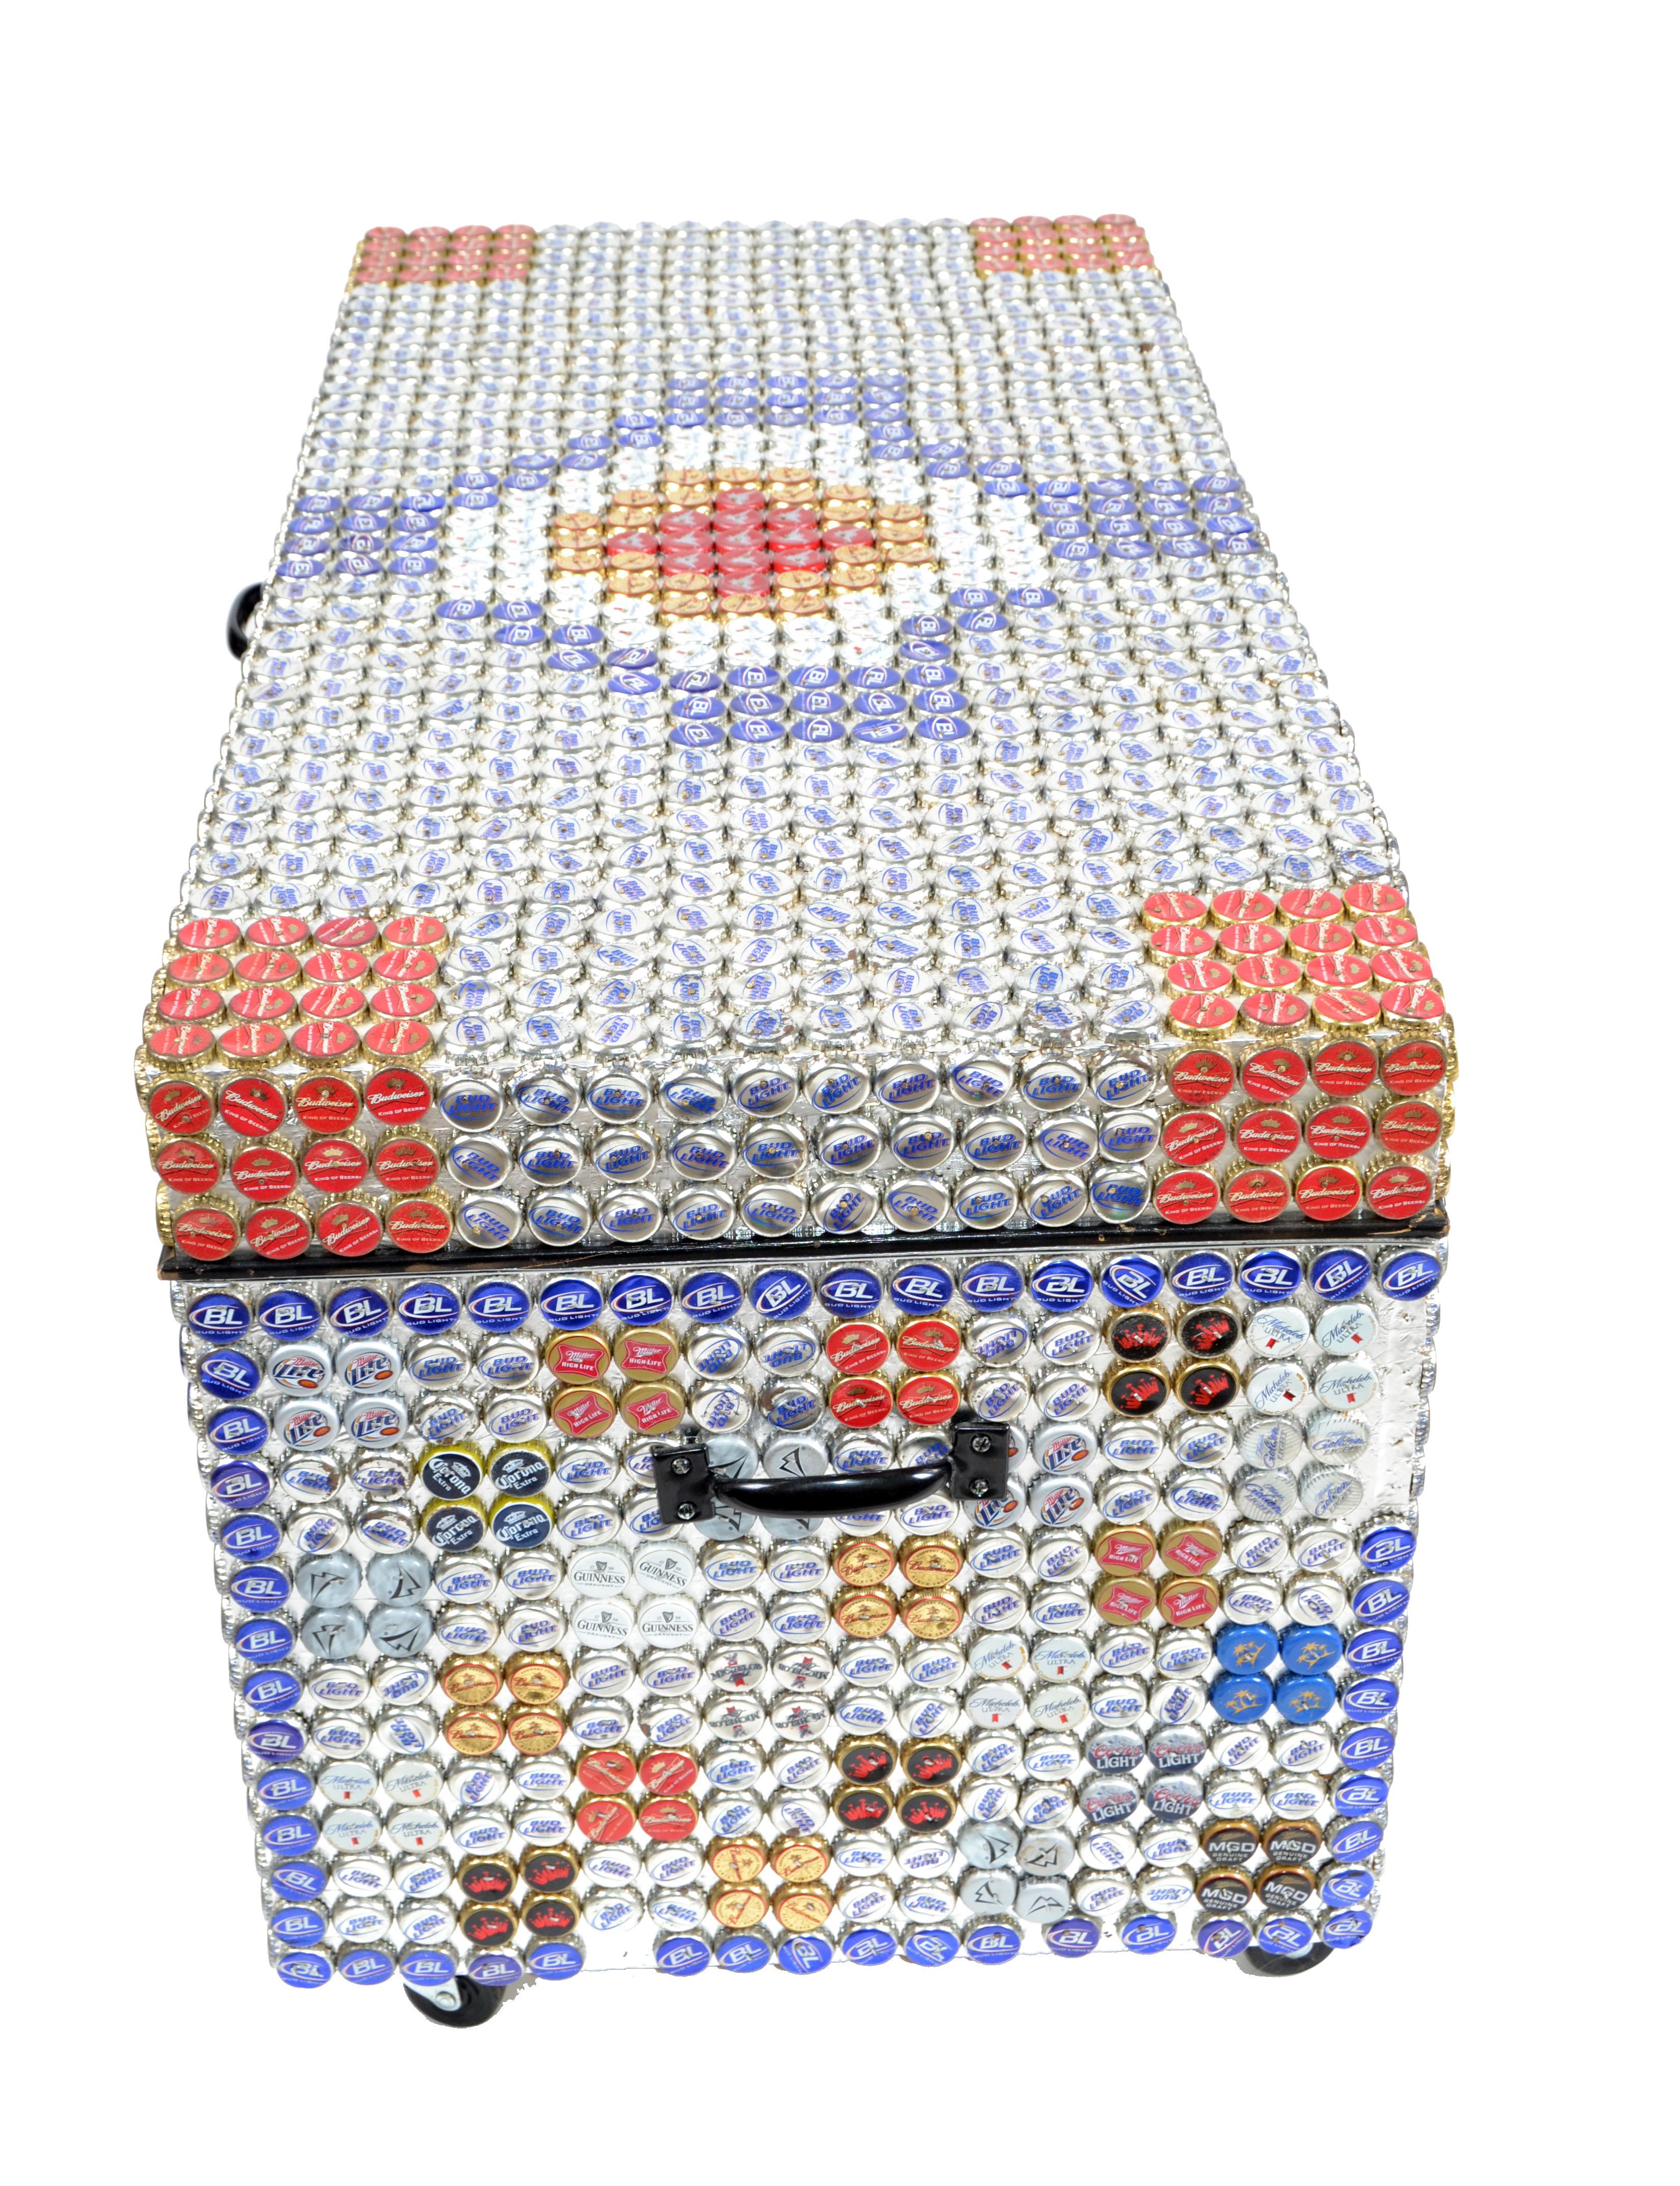 Modern Folk Art Beer Bottle Caps Wood Blanket Chest on Casters Pop Art 1980  In Good Condition For Sale In Miami, FL